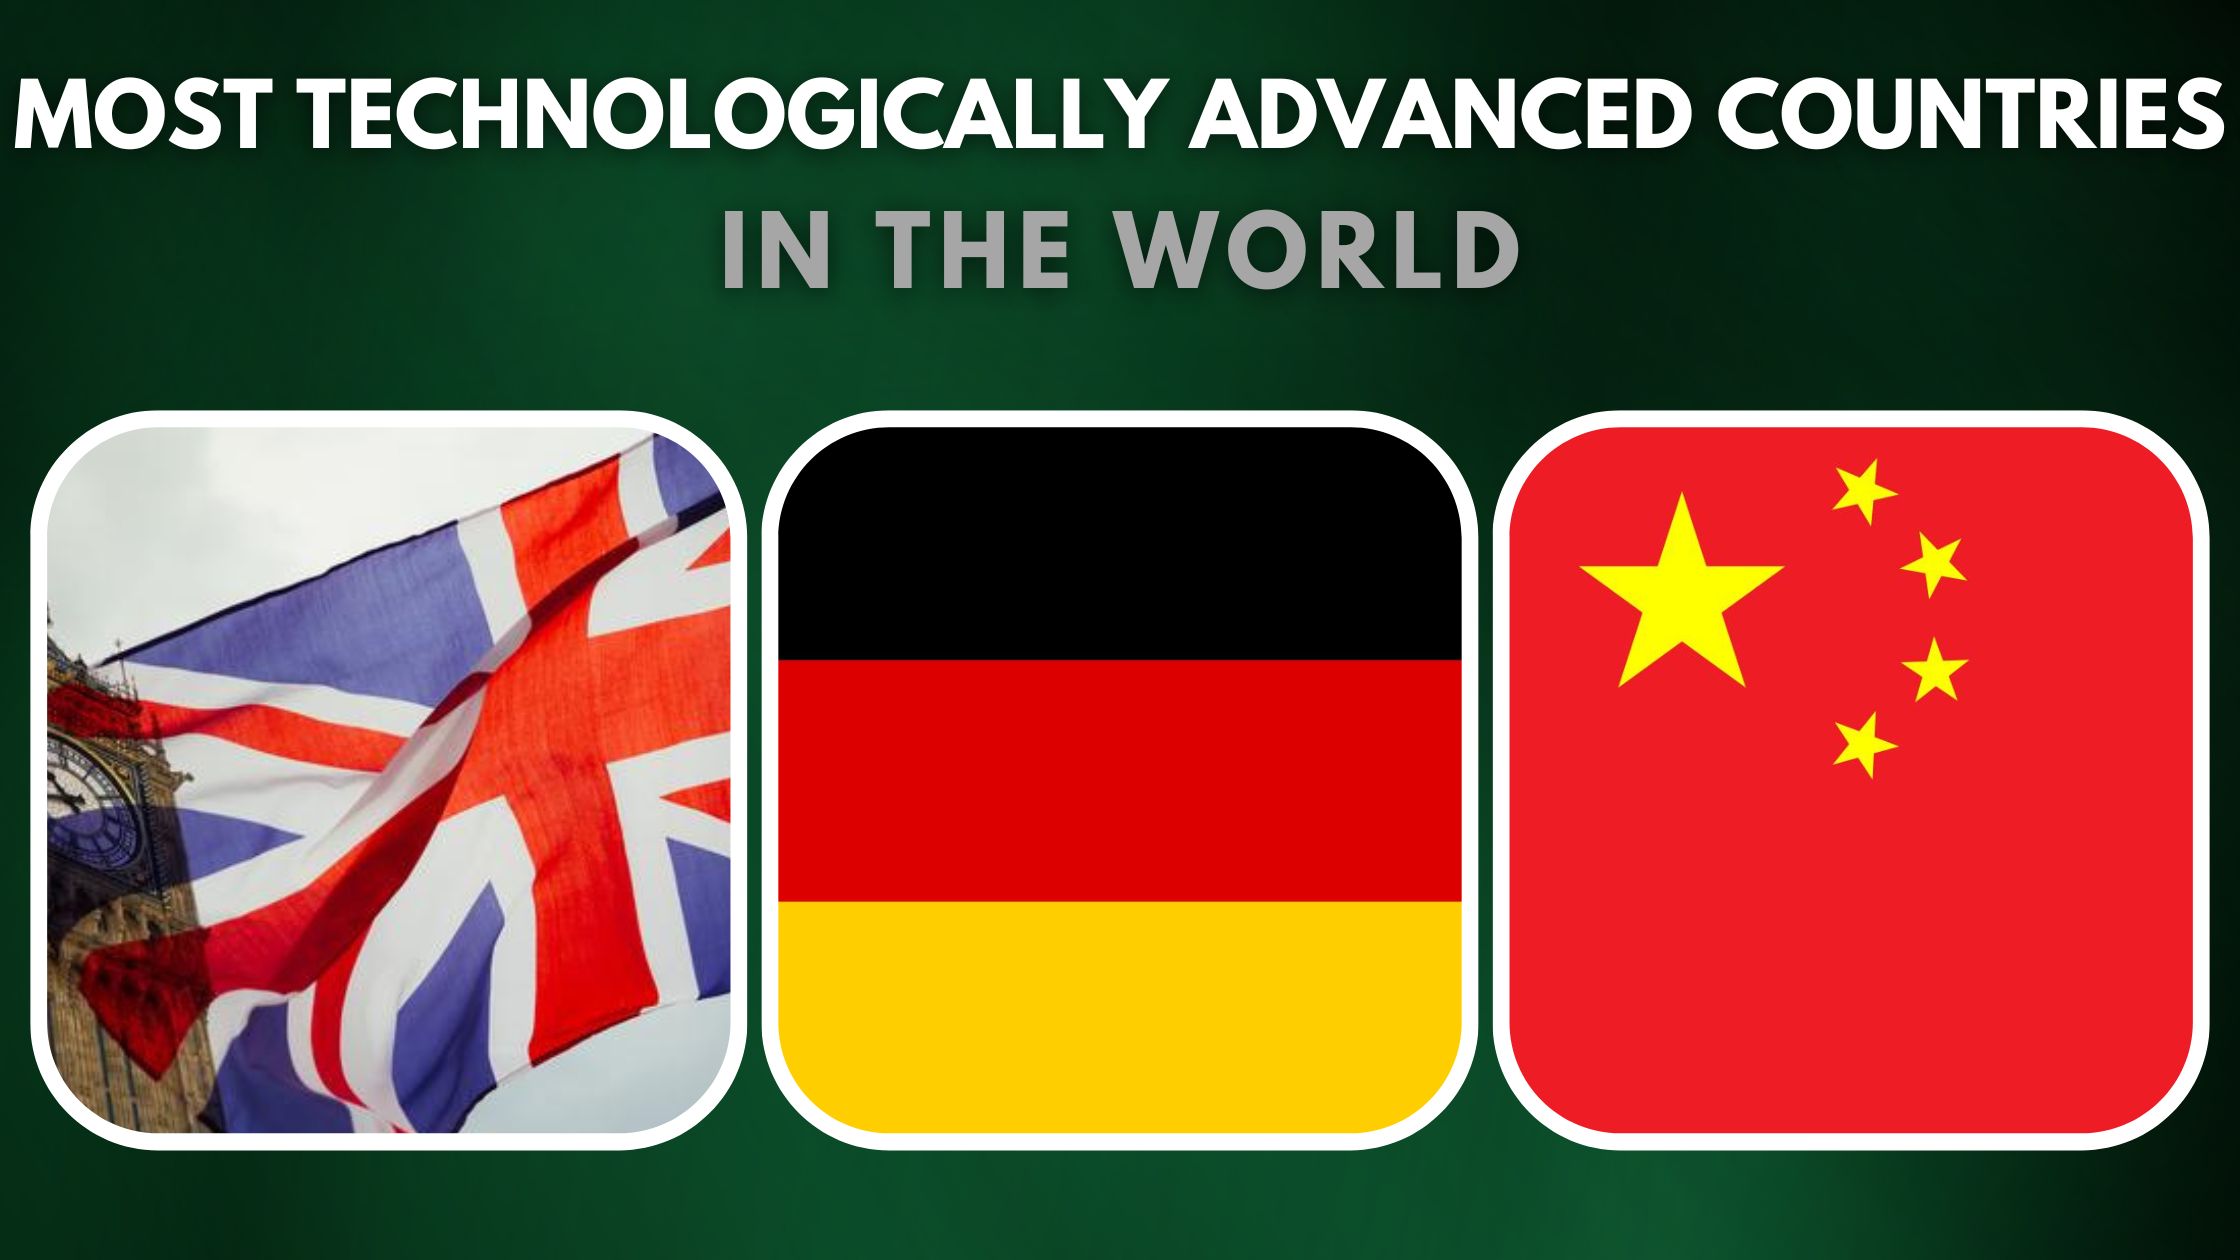 Top 10 Most Technologically Advanced Countries in the World